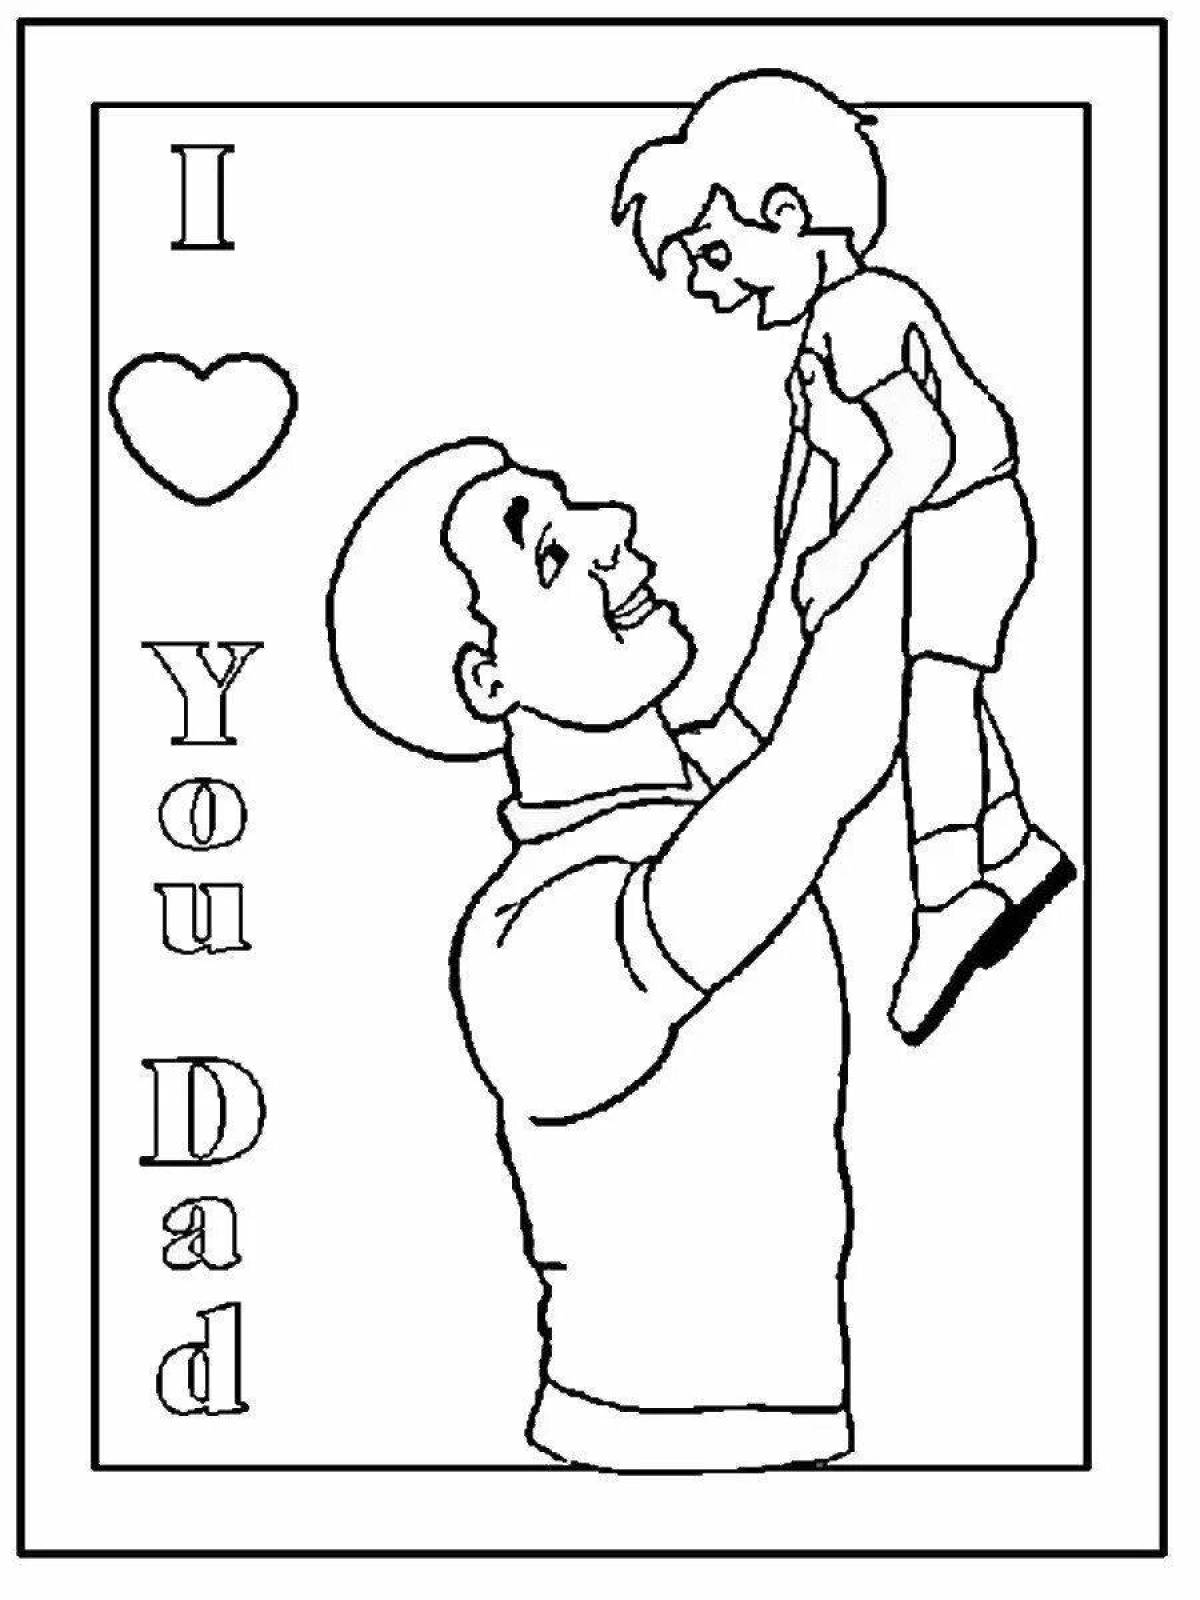 Dad's day coloring book